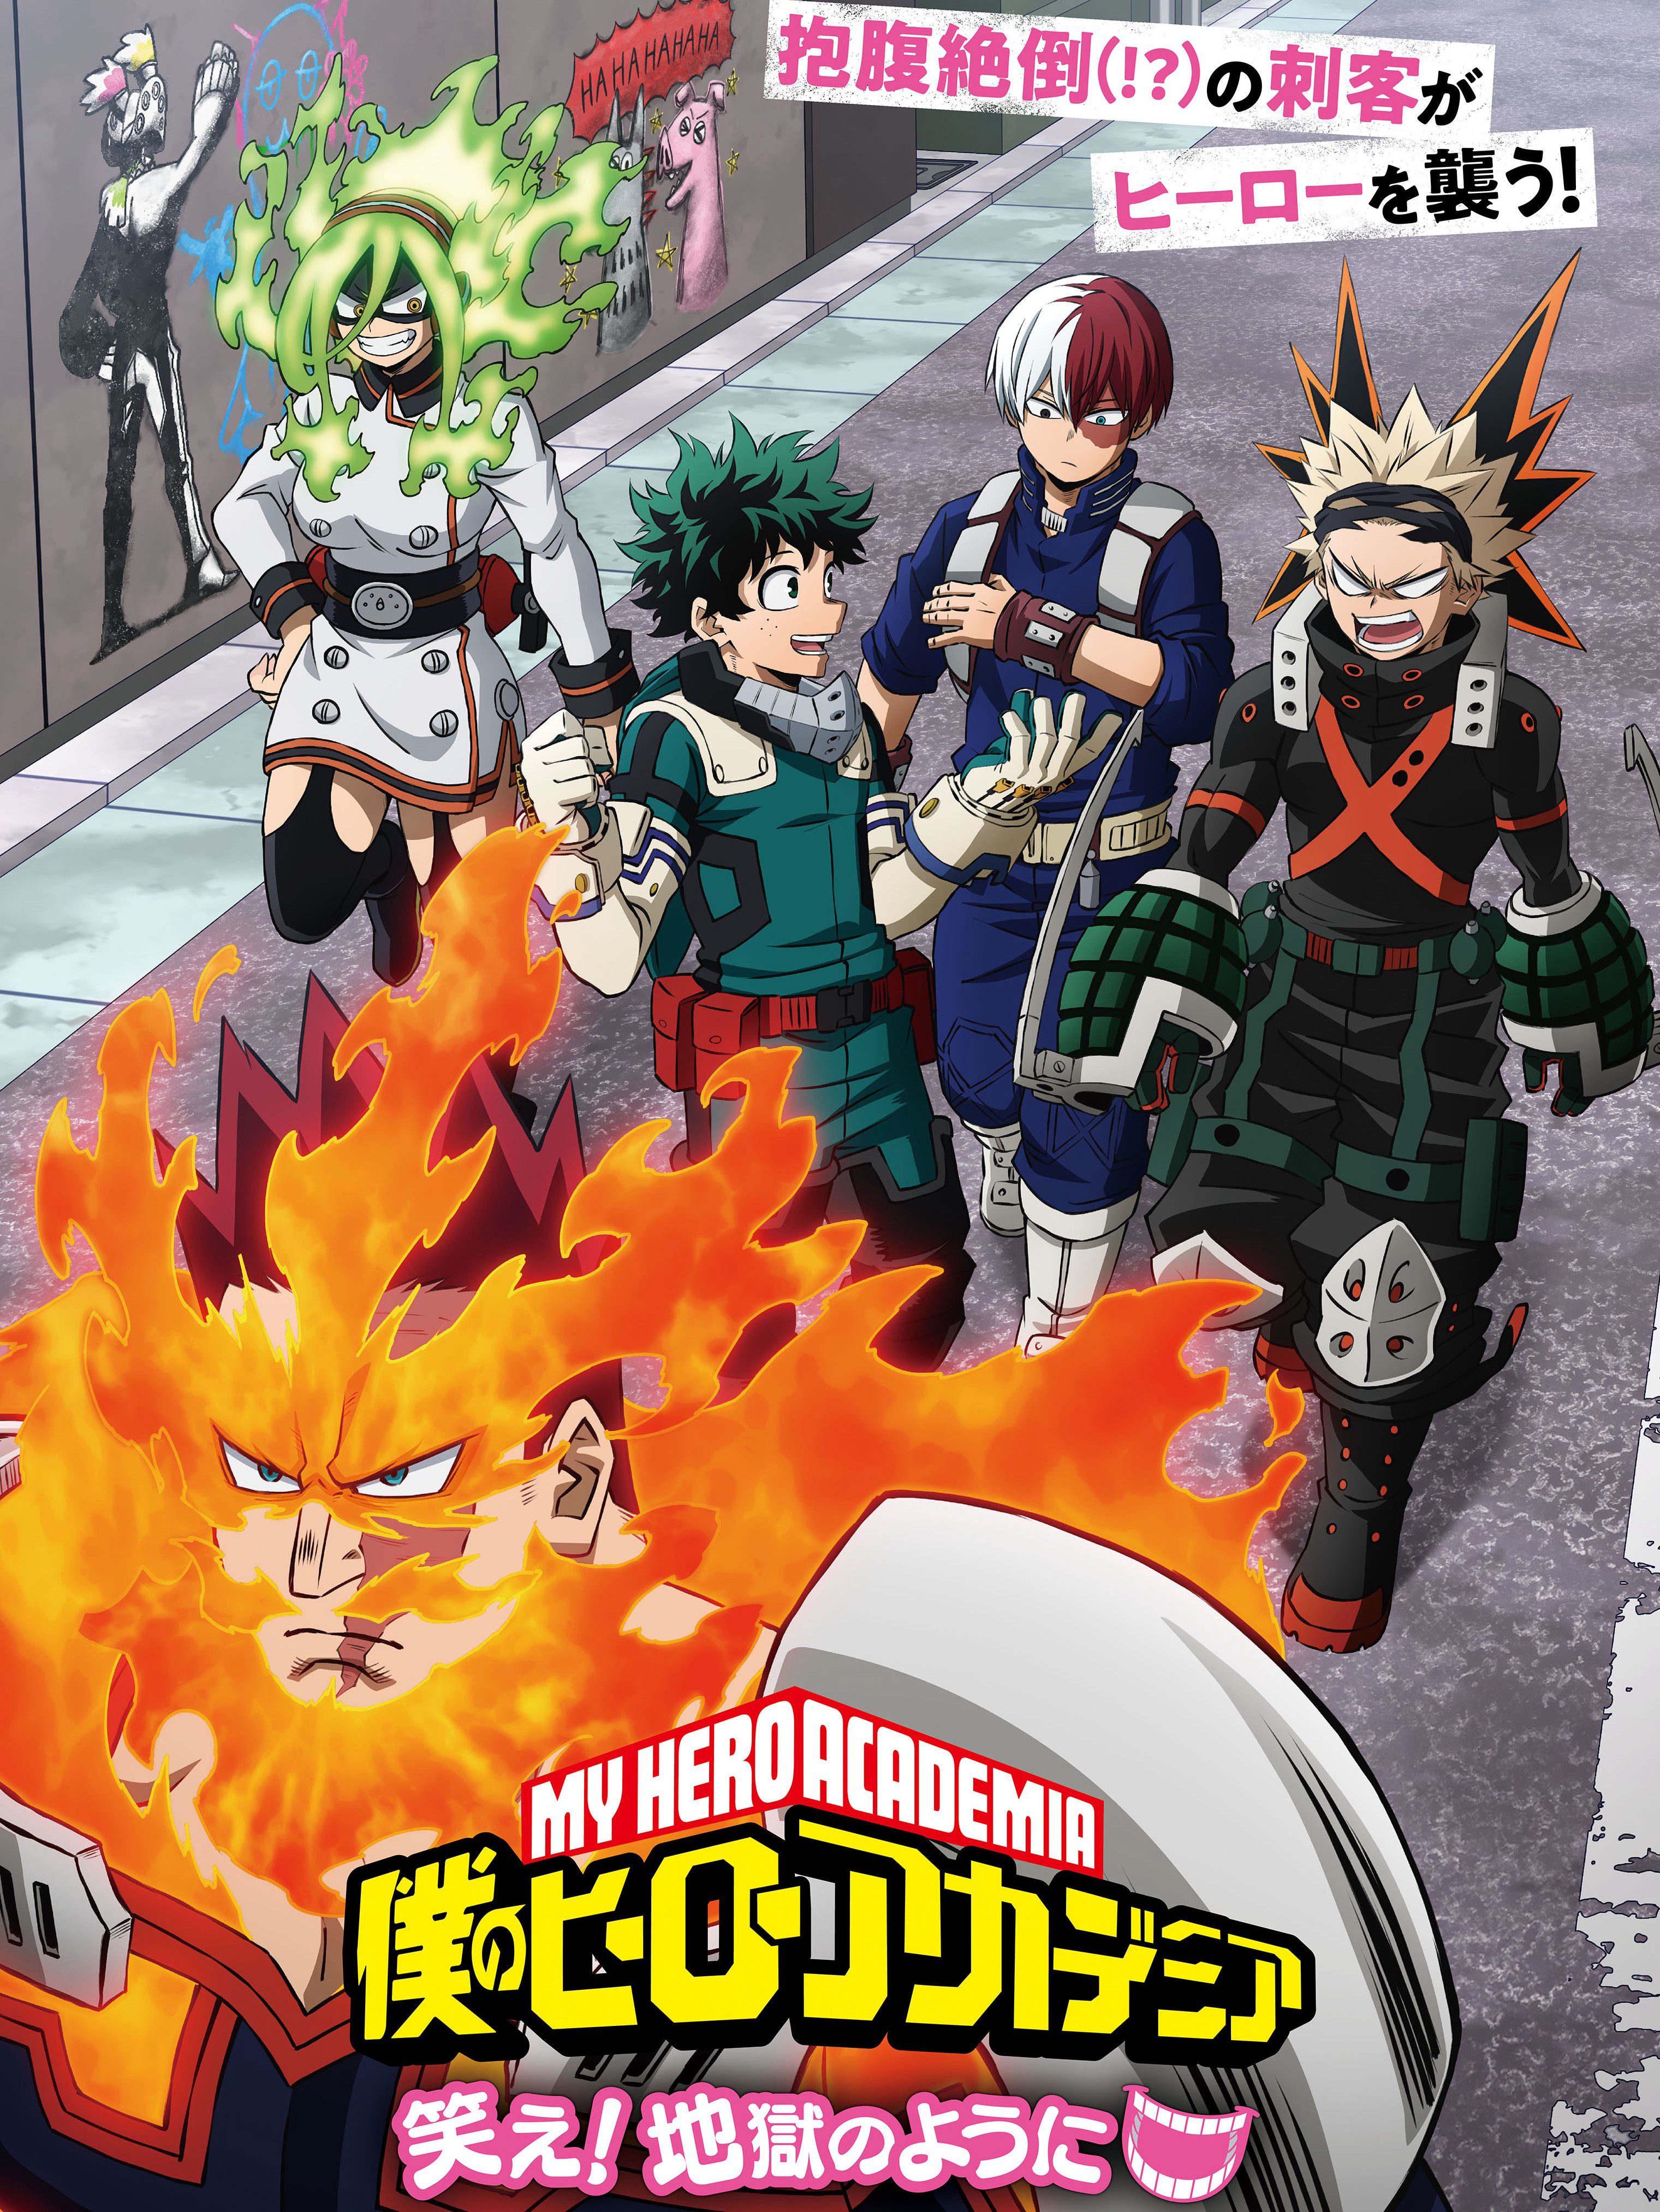 Poster Phim My Hero Academia Laugh! As if you are in hell (僕のヒーローアカデミア 笑え！地獄のように)